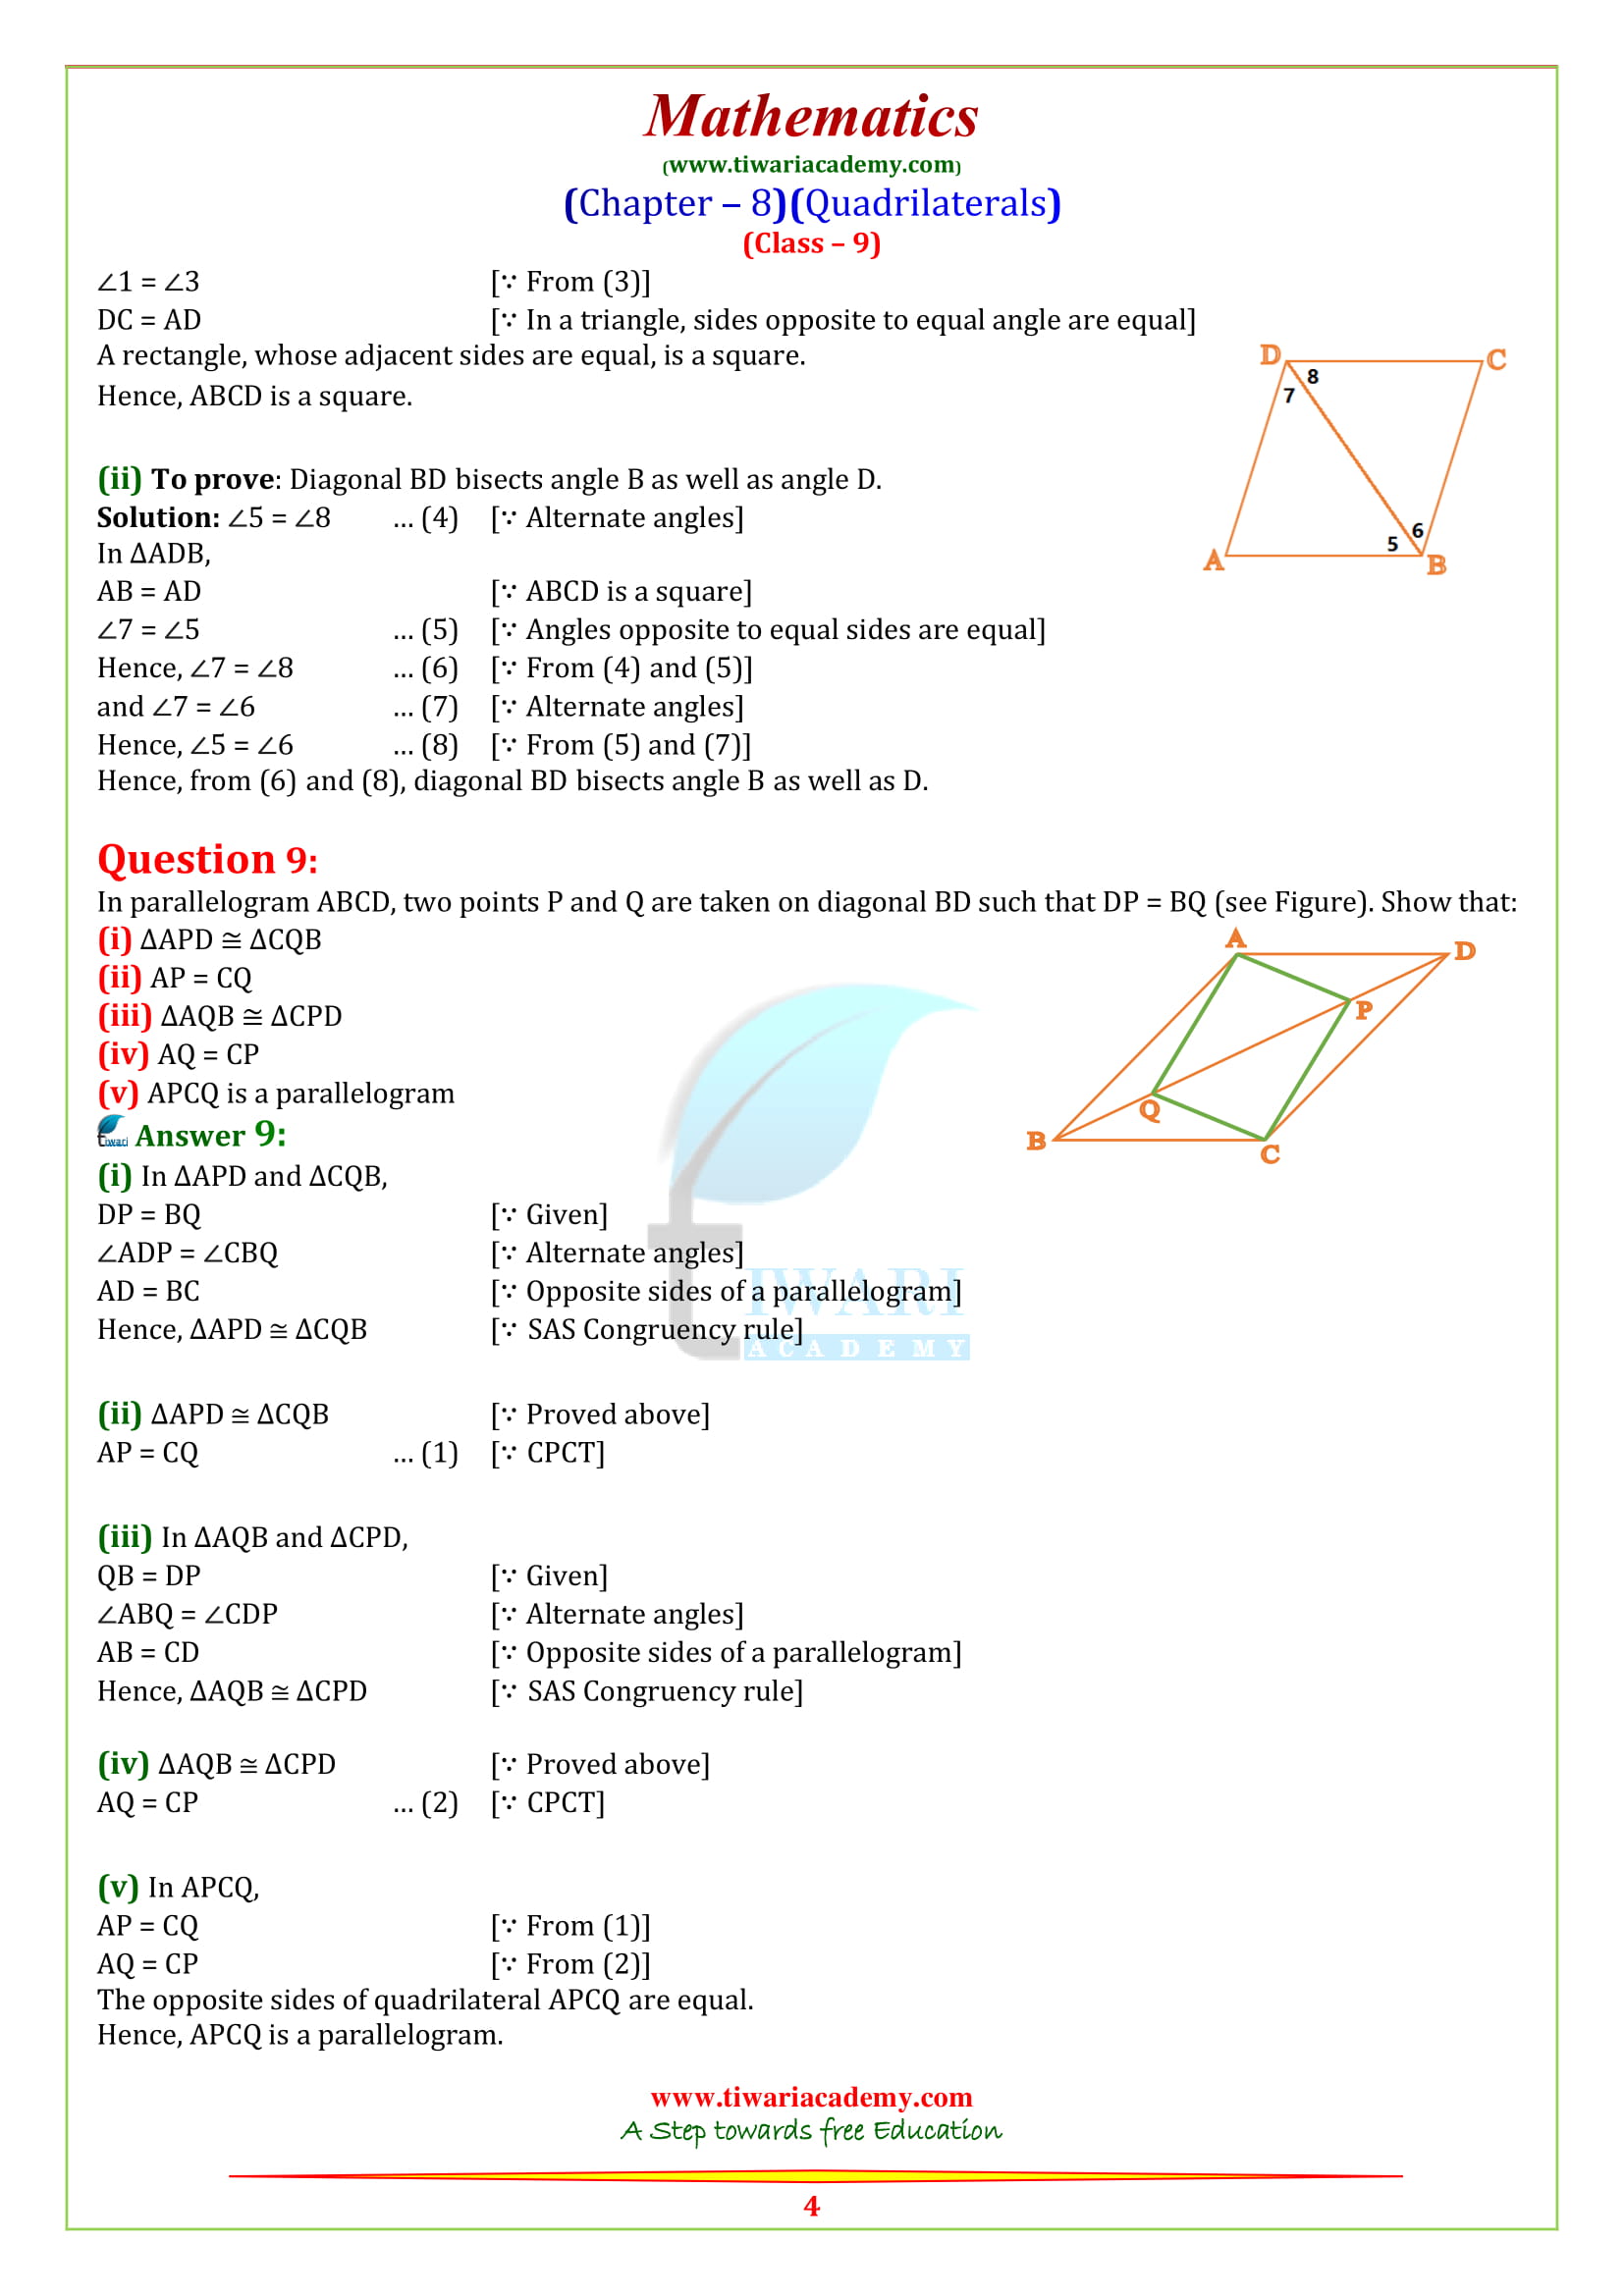 9 Maths Exercise 8.1 Quadrilaterals solutions